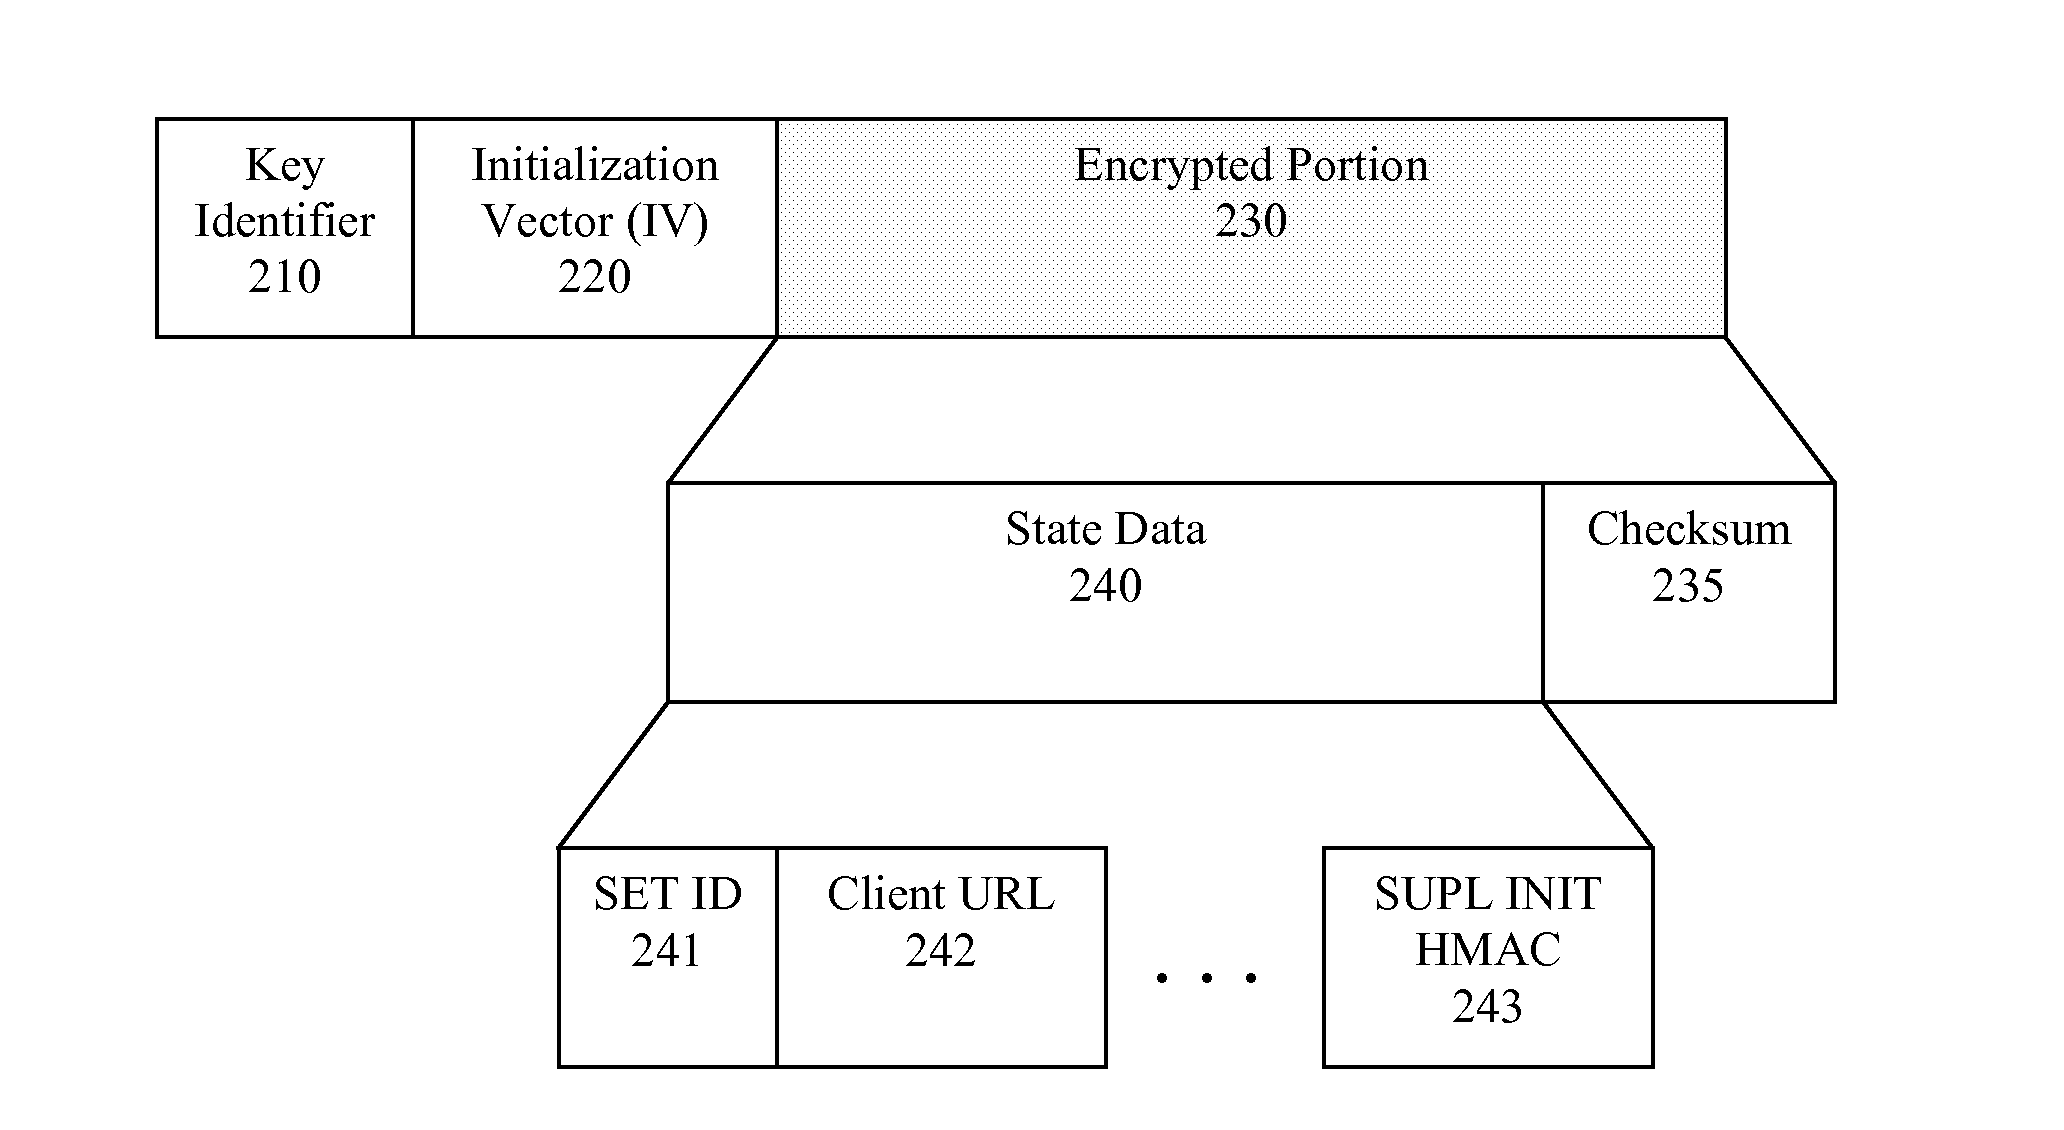 Maintaining triggered session state in secure user plane location (SUPL) enabled system